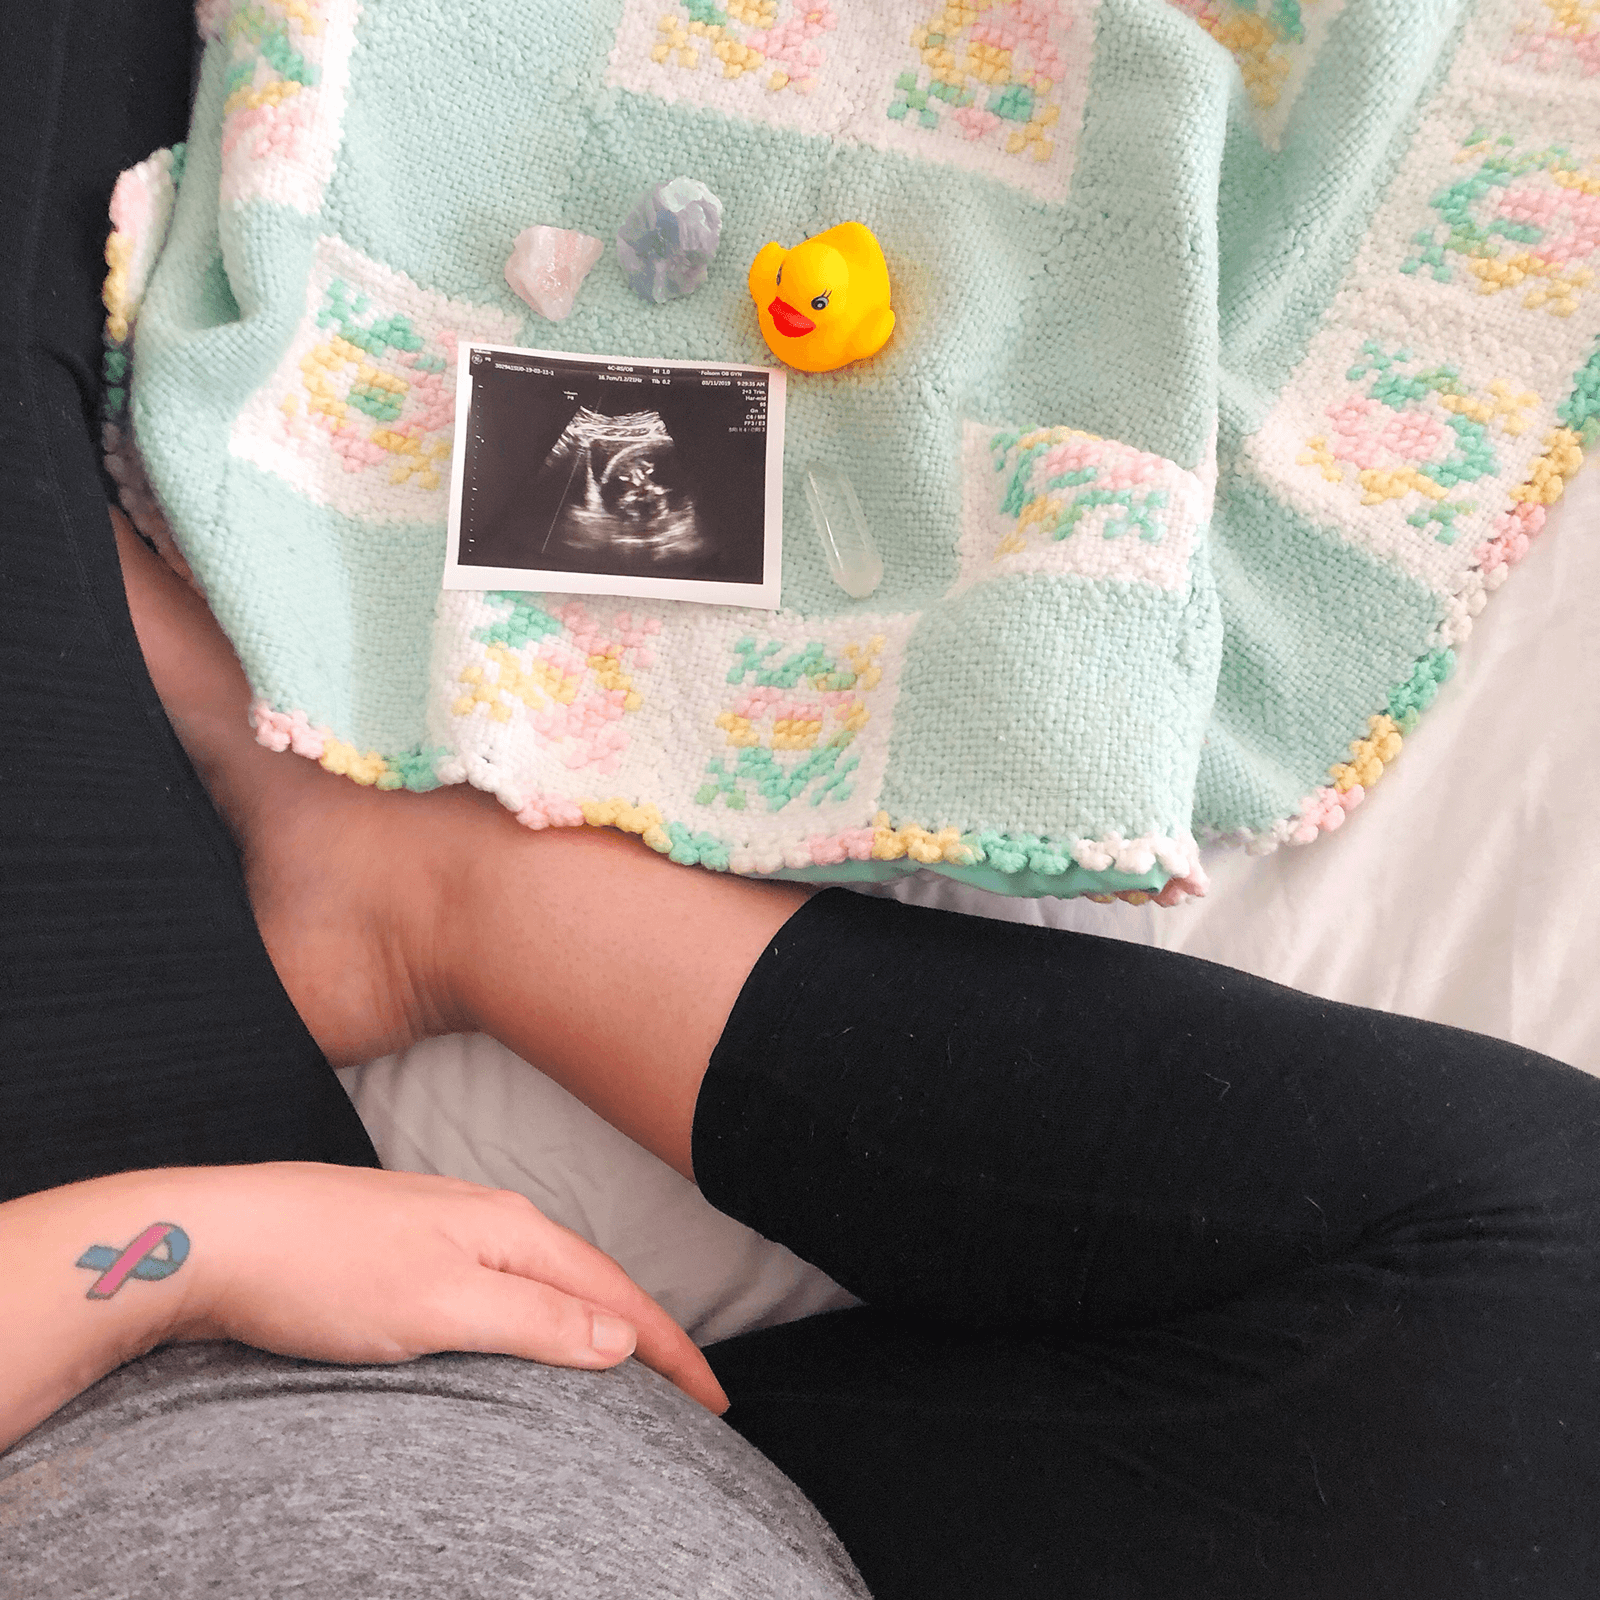 Coping With Pregnancy After Loss